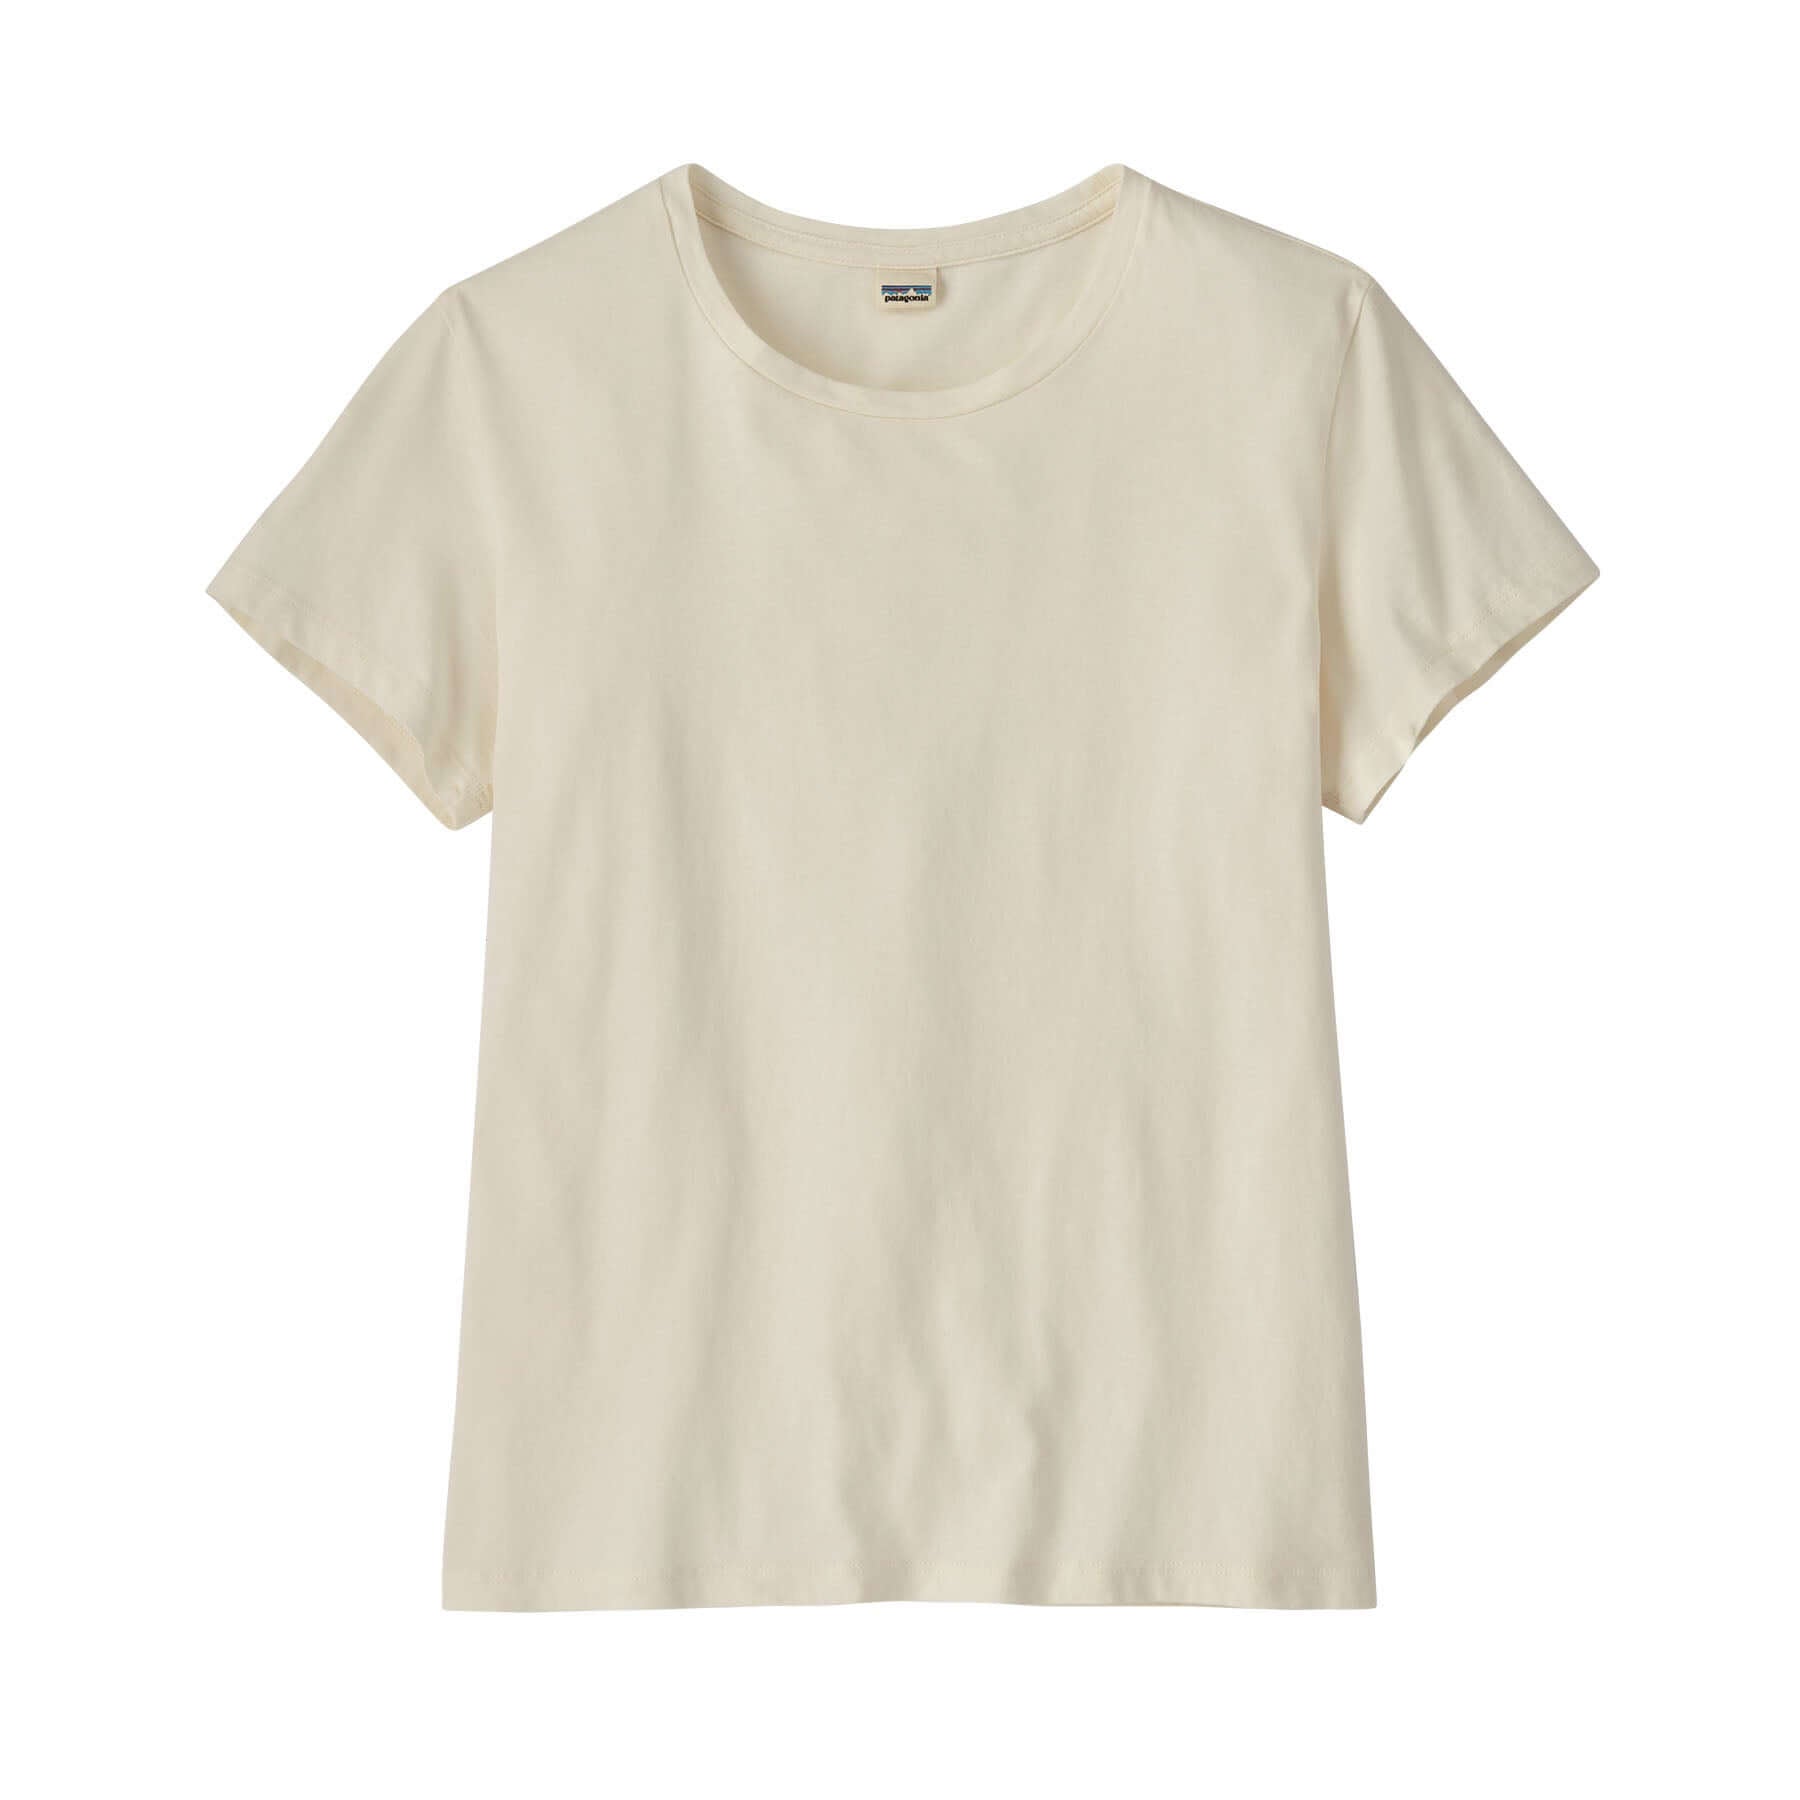 Women's Regenerative Organic Certified Cotton Tee in Undyed Natural | Patagonia Bend